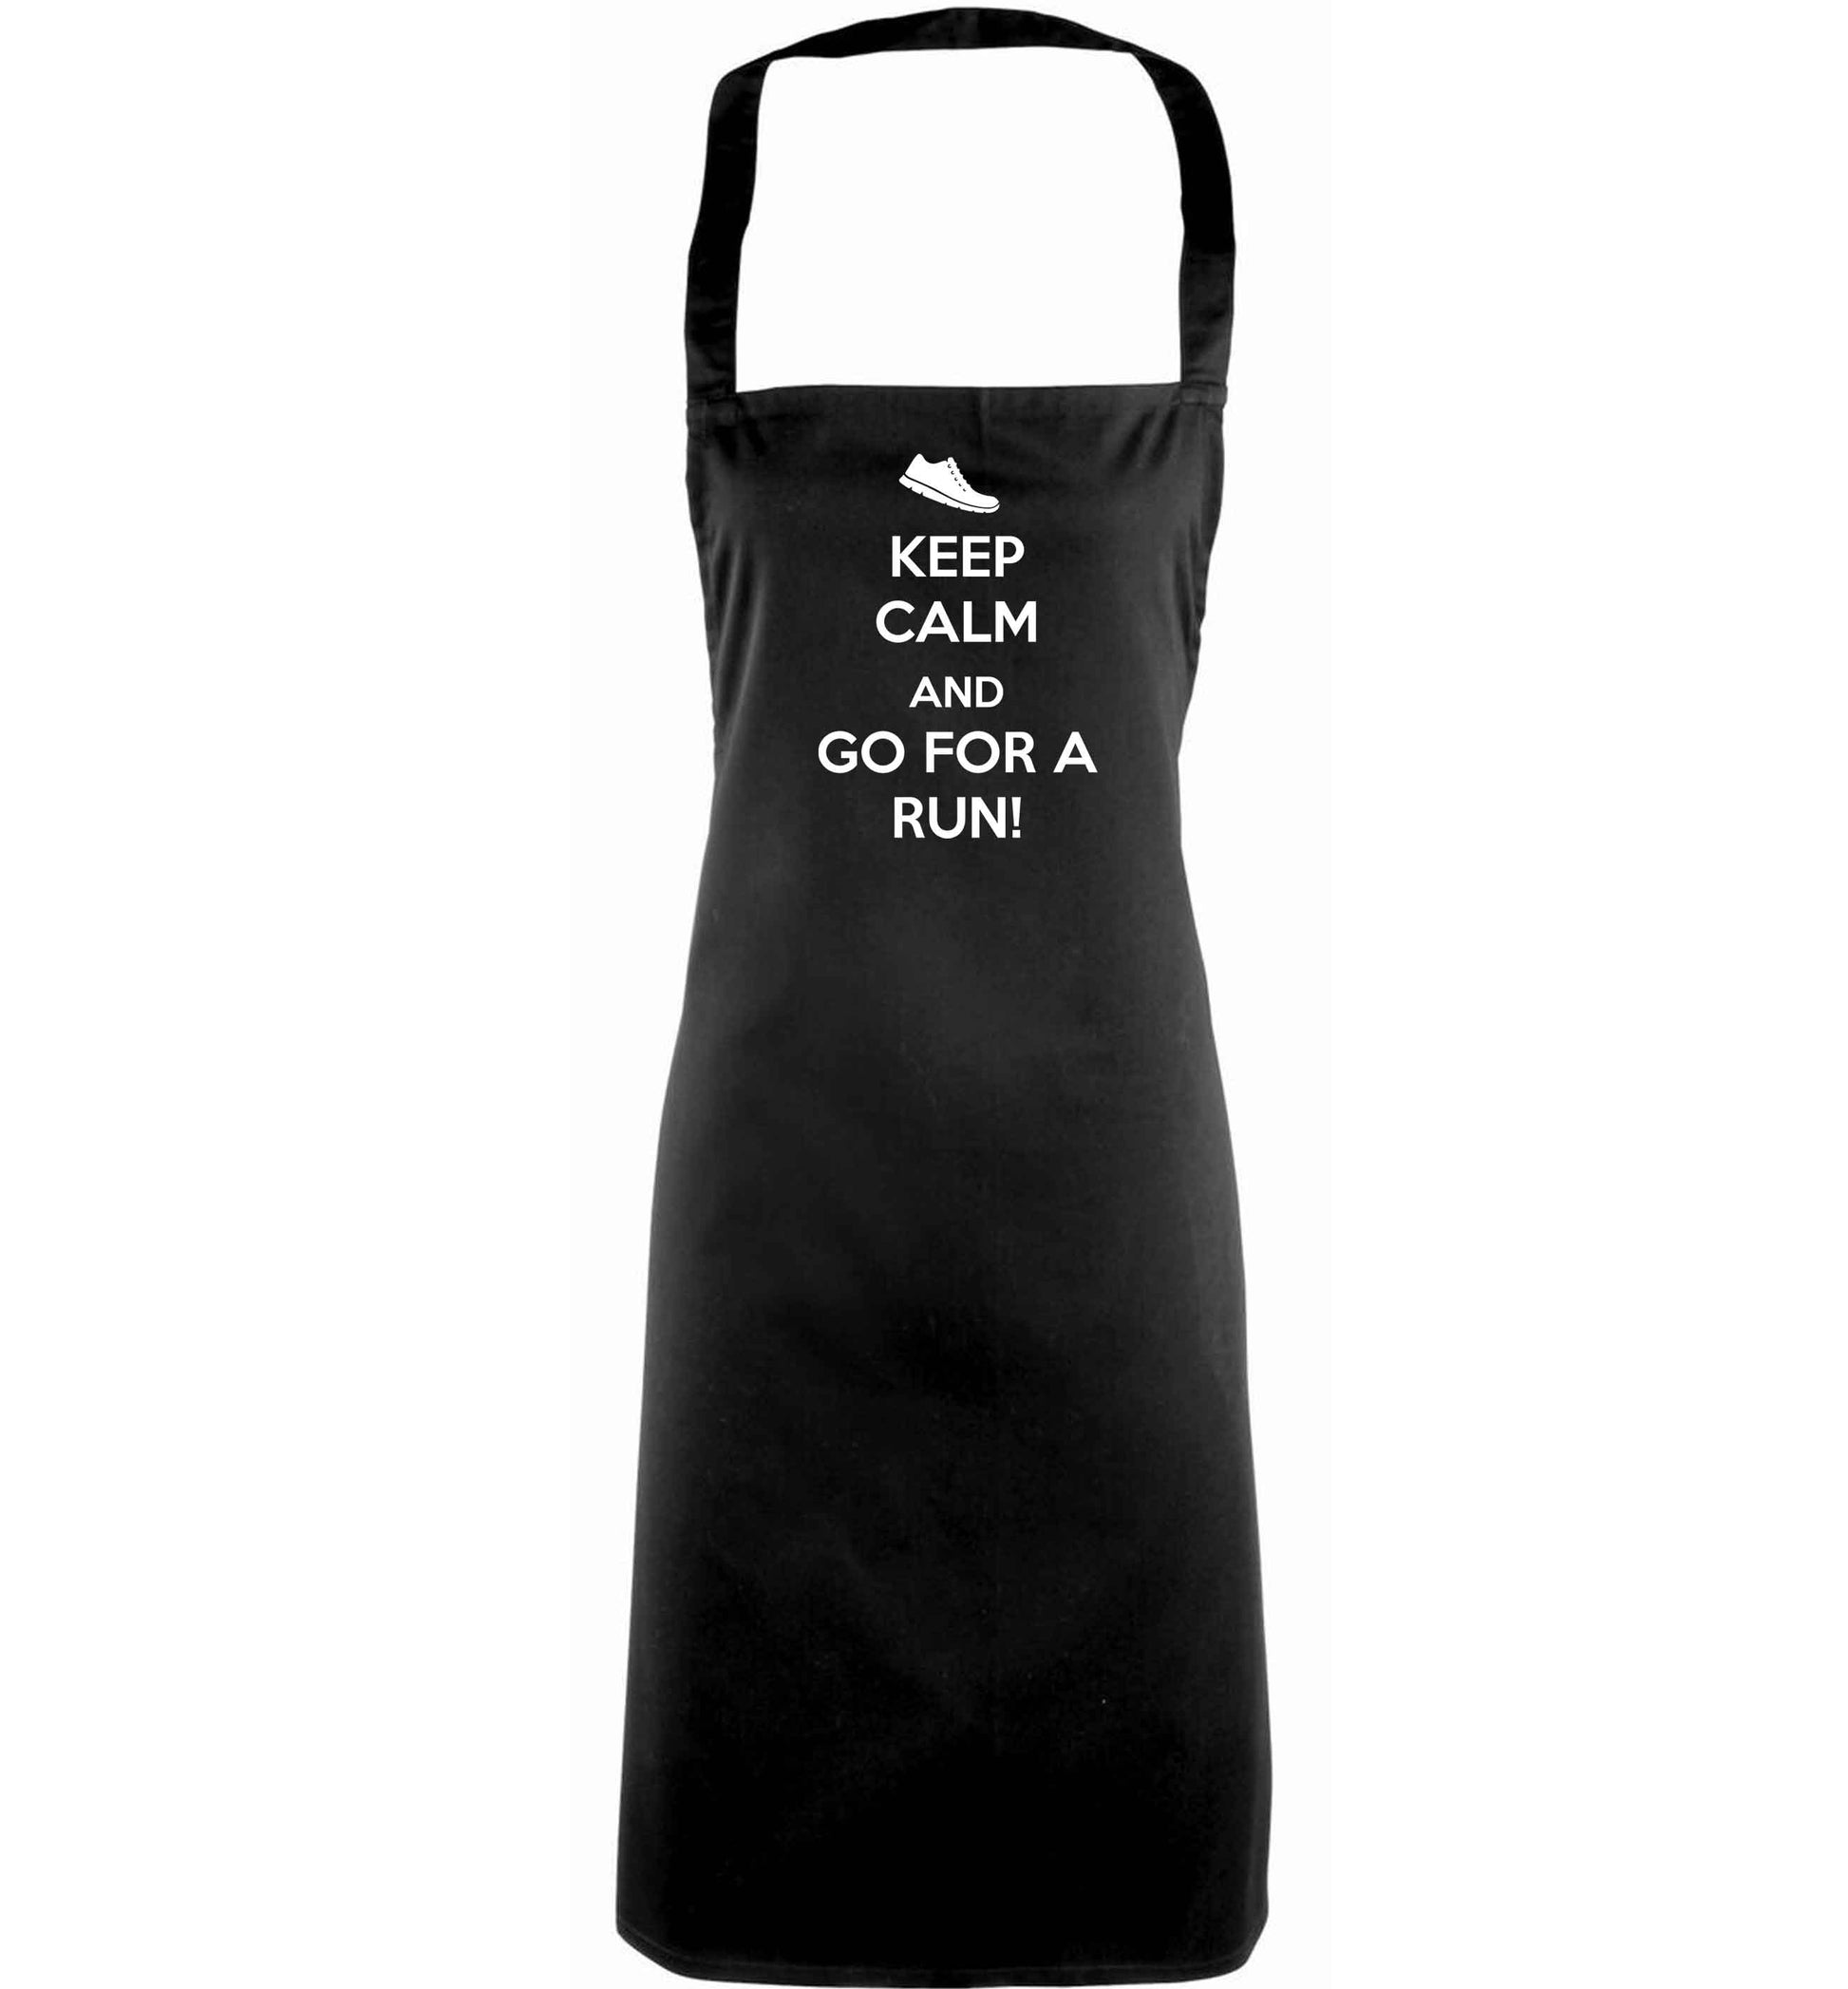 Keep calm and go for a run adults black apron